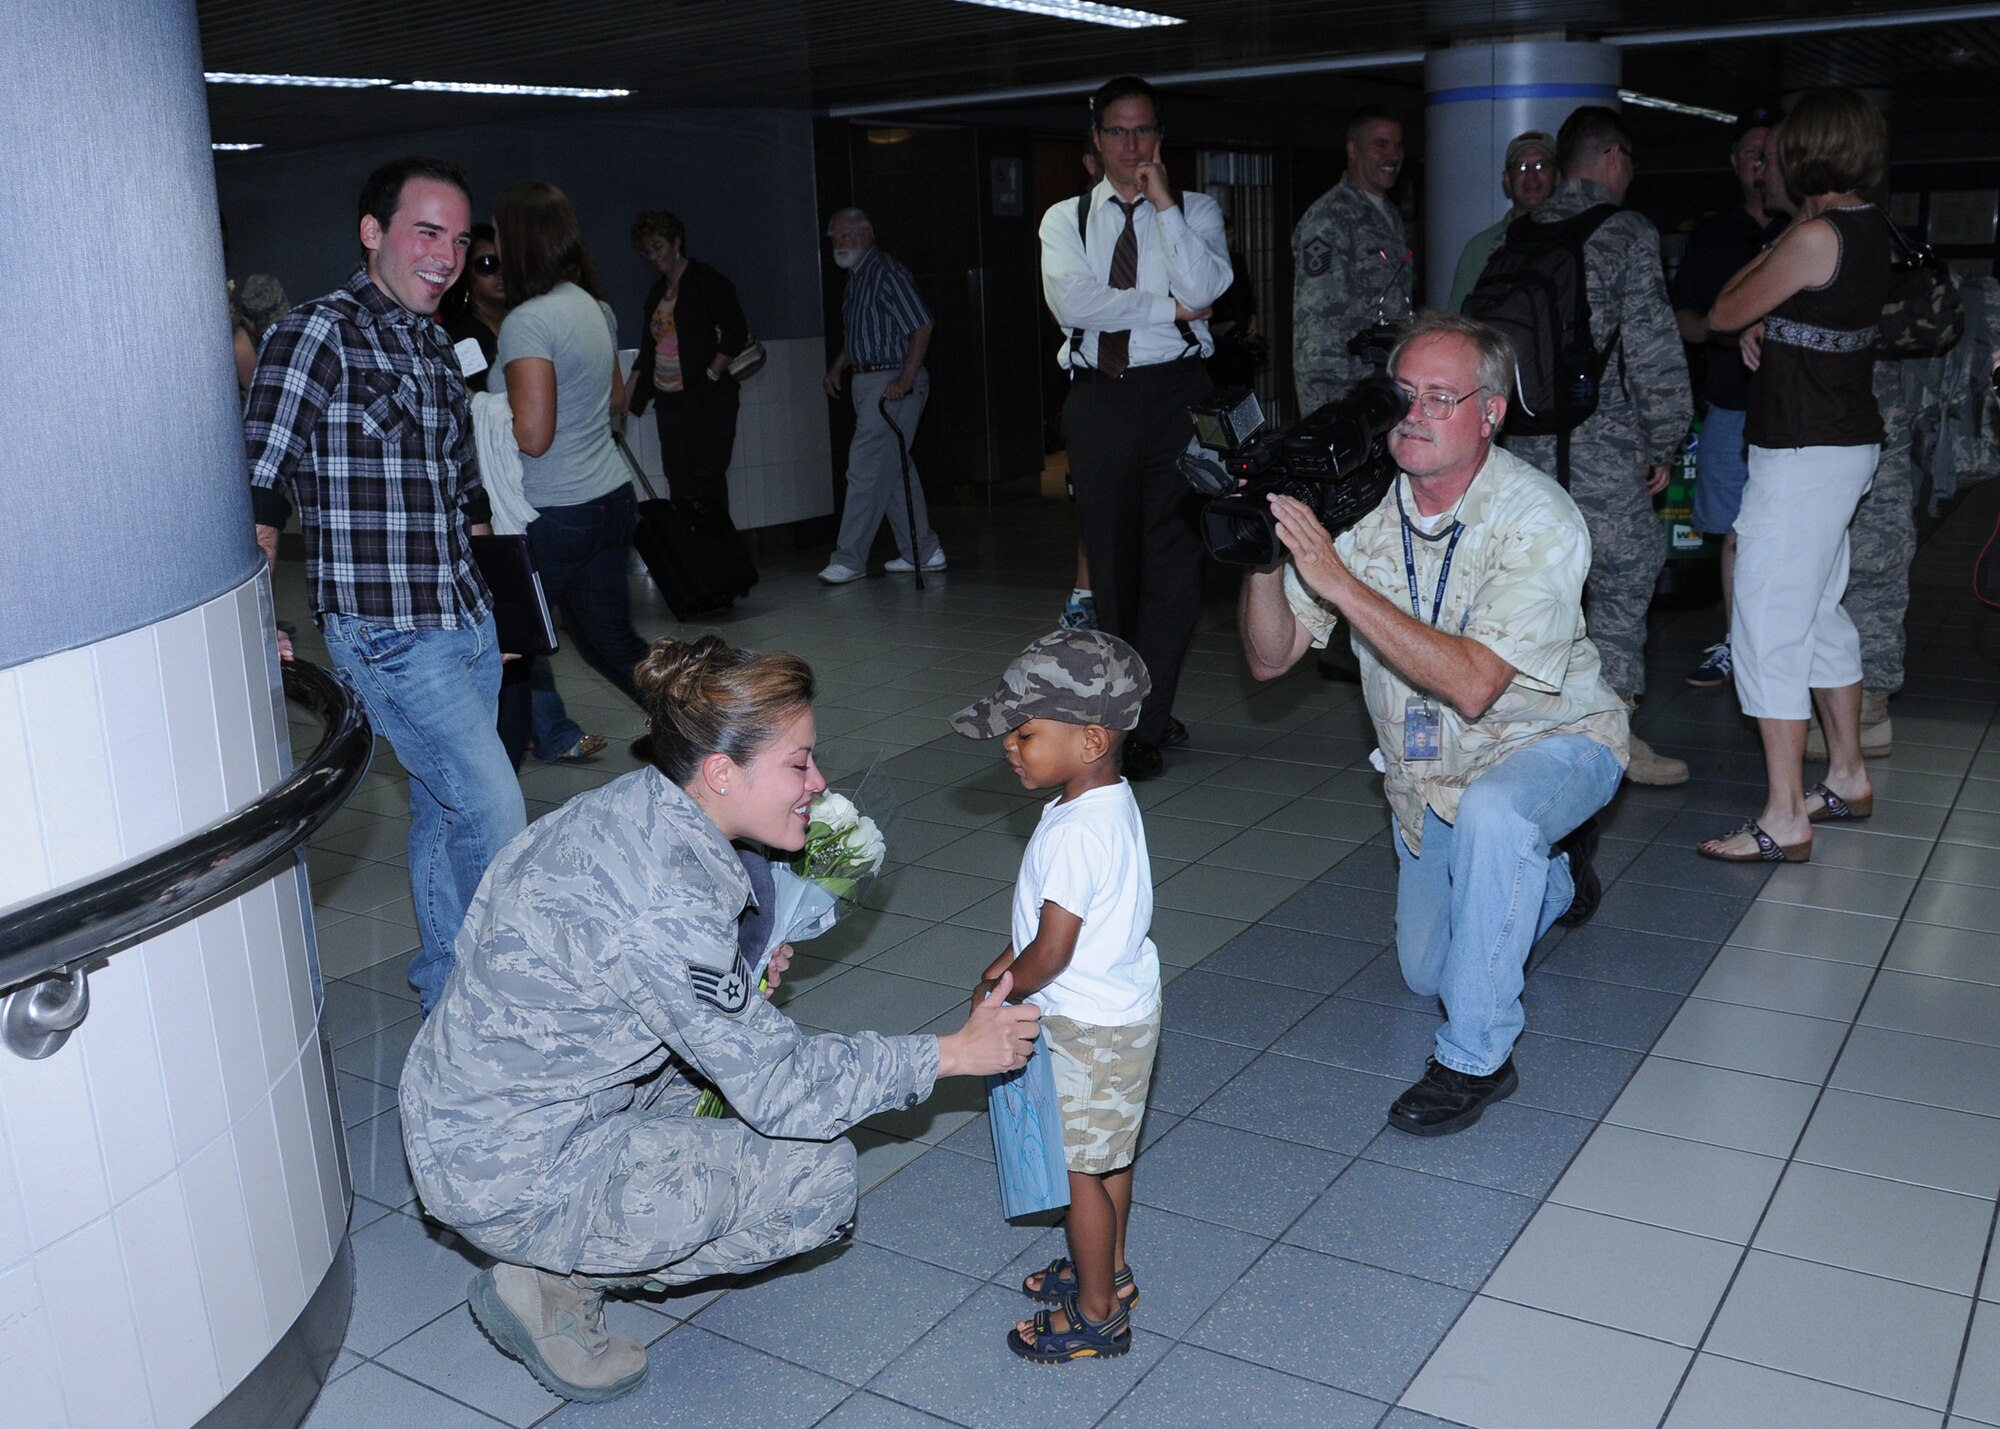 Sidewinder vocalist Staff Sgt. Angie Johnson chats with a child of a band member while local news media looks on.  Members of Sidewinder returned to Saint Louis Sept 3 from their 45-day deployment to Southwest Asia where they performed for numerous troops in Iraq, Afghanistan, and throughout the region.  Sidewinder is the rock element of the 571st Air Force Band "Air National Guard Band of the Central States" based at the 131st Bomb Wing, Missouri Air National Guard, Lambert-Saint Louis.  Their rendition of "Rolling in the Deep" by Adele became a You Tube sensation and has been viewed over 1.3 million times.  (Photo by Master Sgt. Mary-Dale Amison)